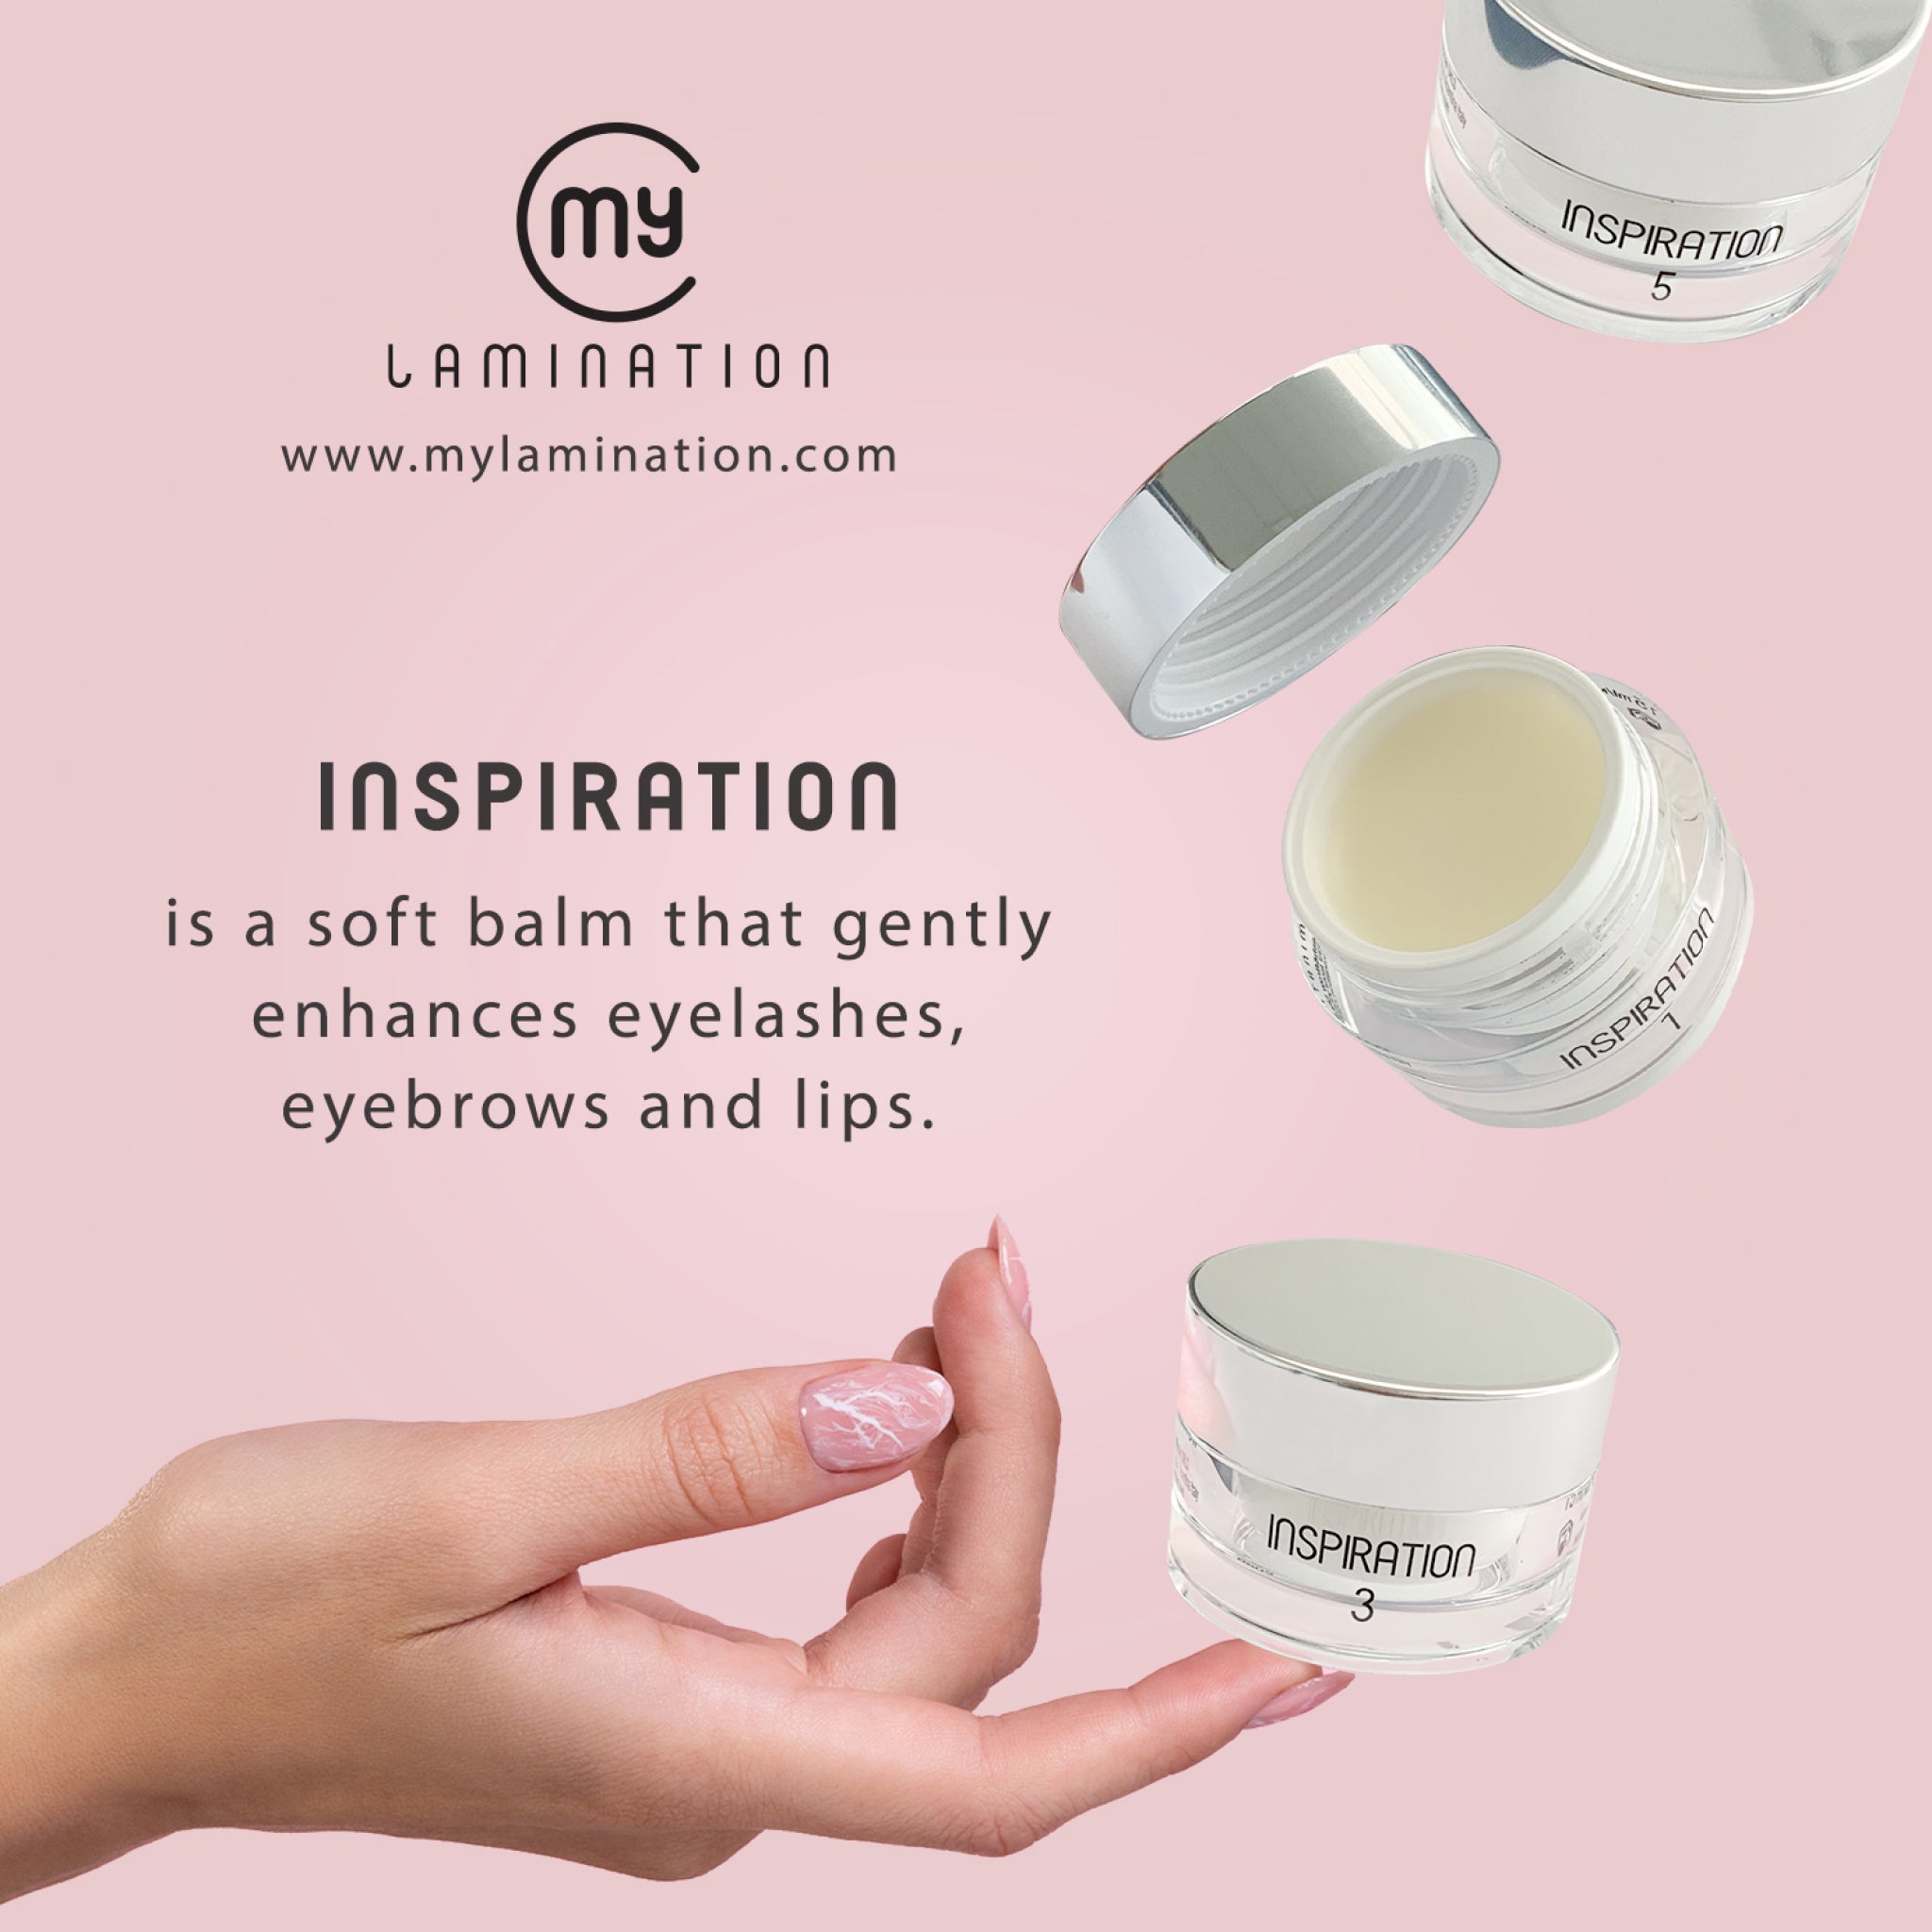 My Lamination Inspiration Balm is a soft balm that gently enhances eyelashes, eyebrows and lips